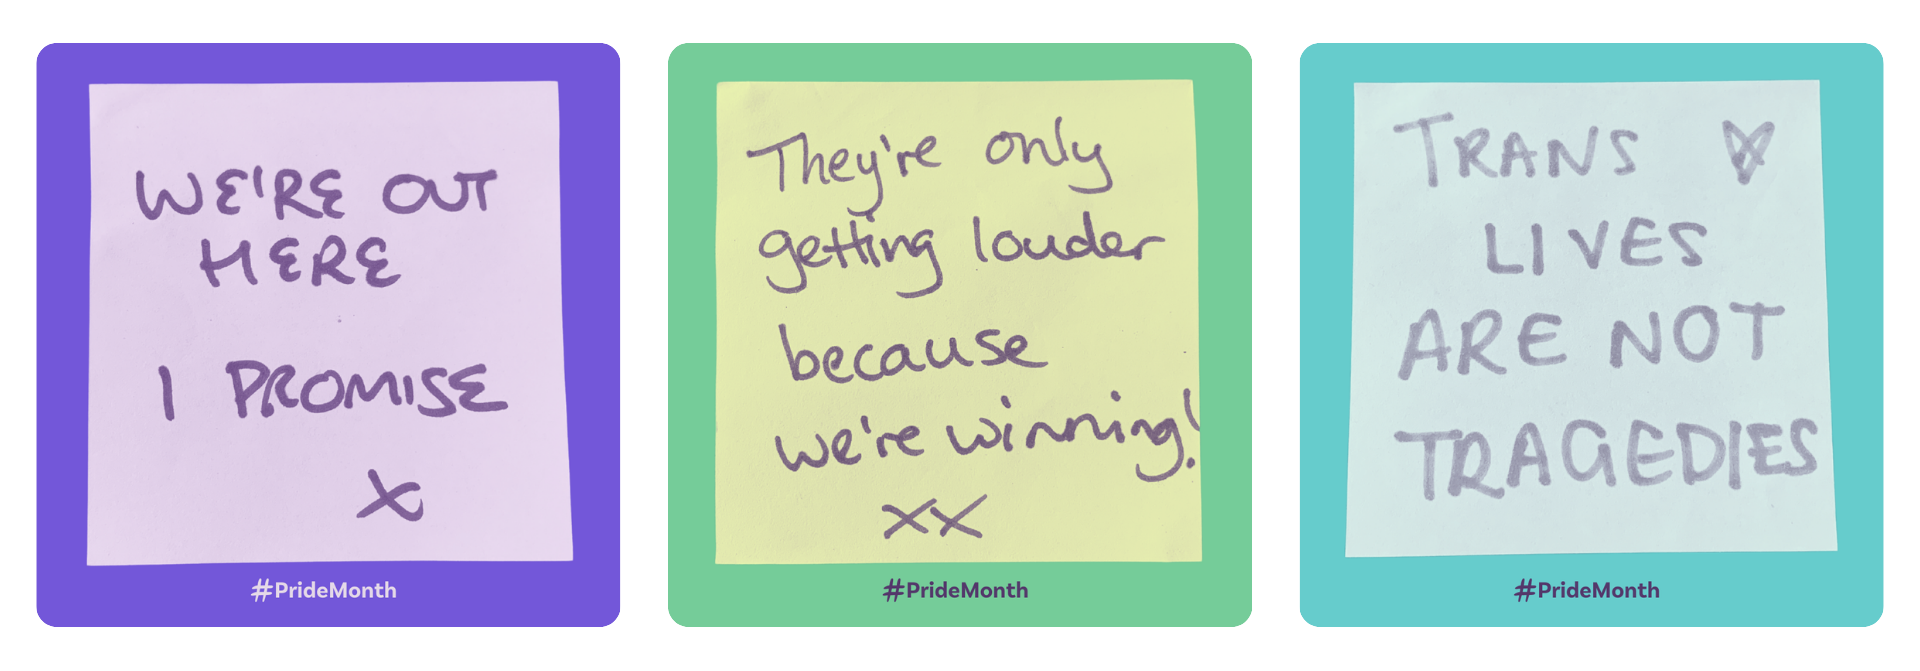 Three images of post-it notes with writing on them. Note 1 reads: "We're out here I promise" Note 2 reads: "They're only getting louder because we're winning!" Note 3 reads: "Trans lives are not tragedies"